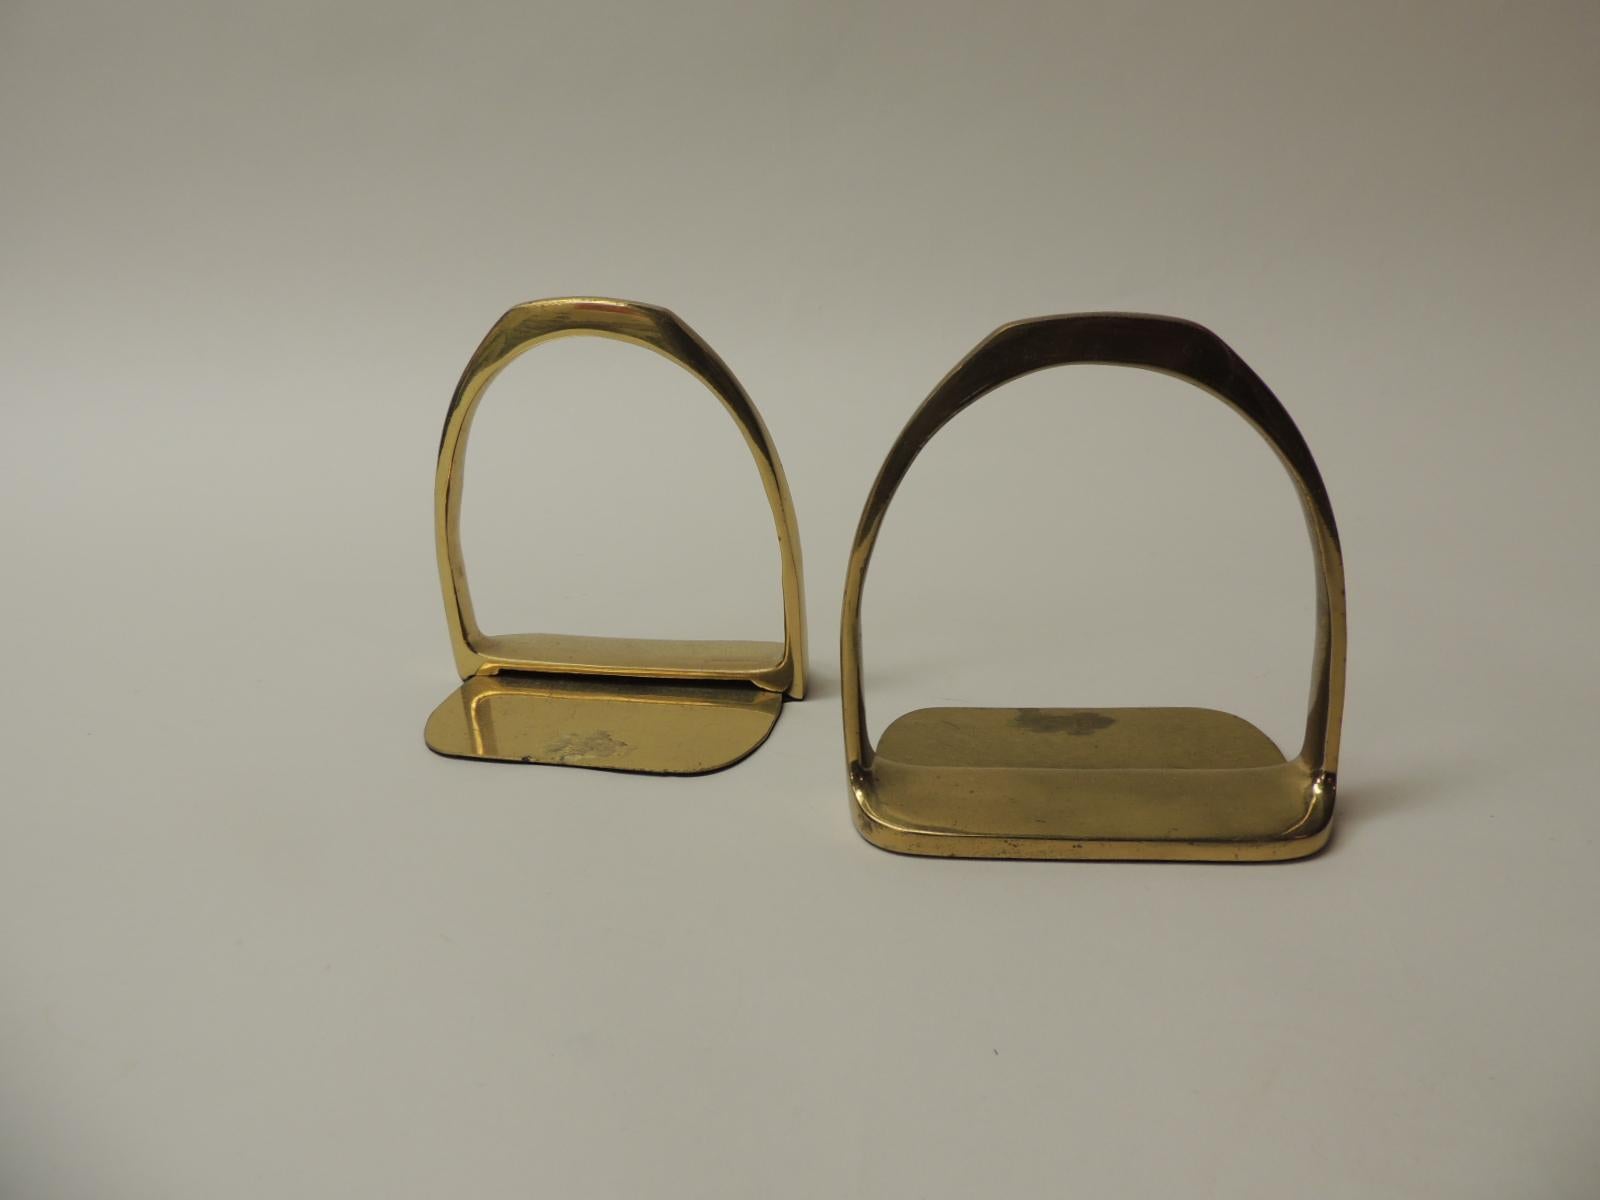 Pair of brass Hermes style horse saddle stirrups bookends
Polished brass finish
Size: 5 x 5.5 x 3.5.